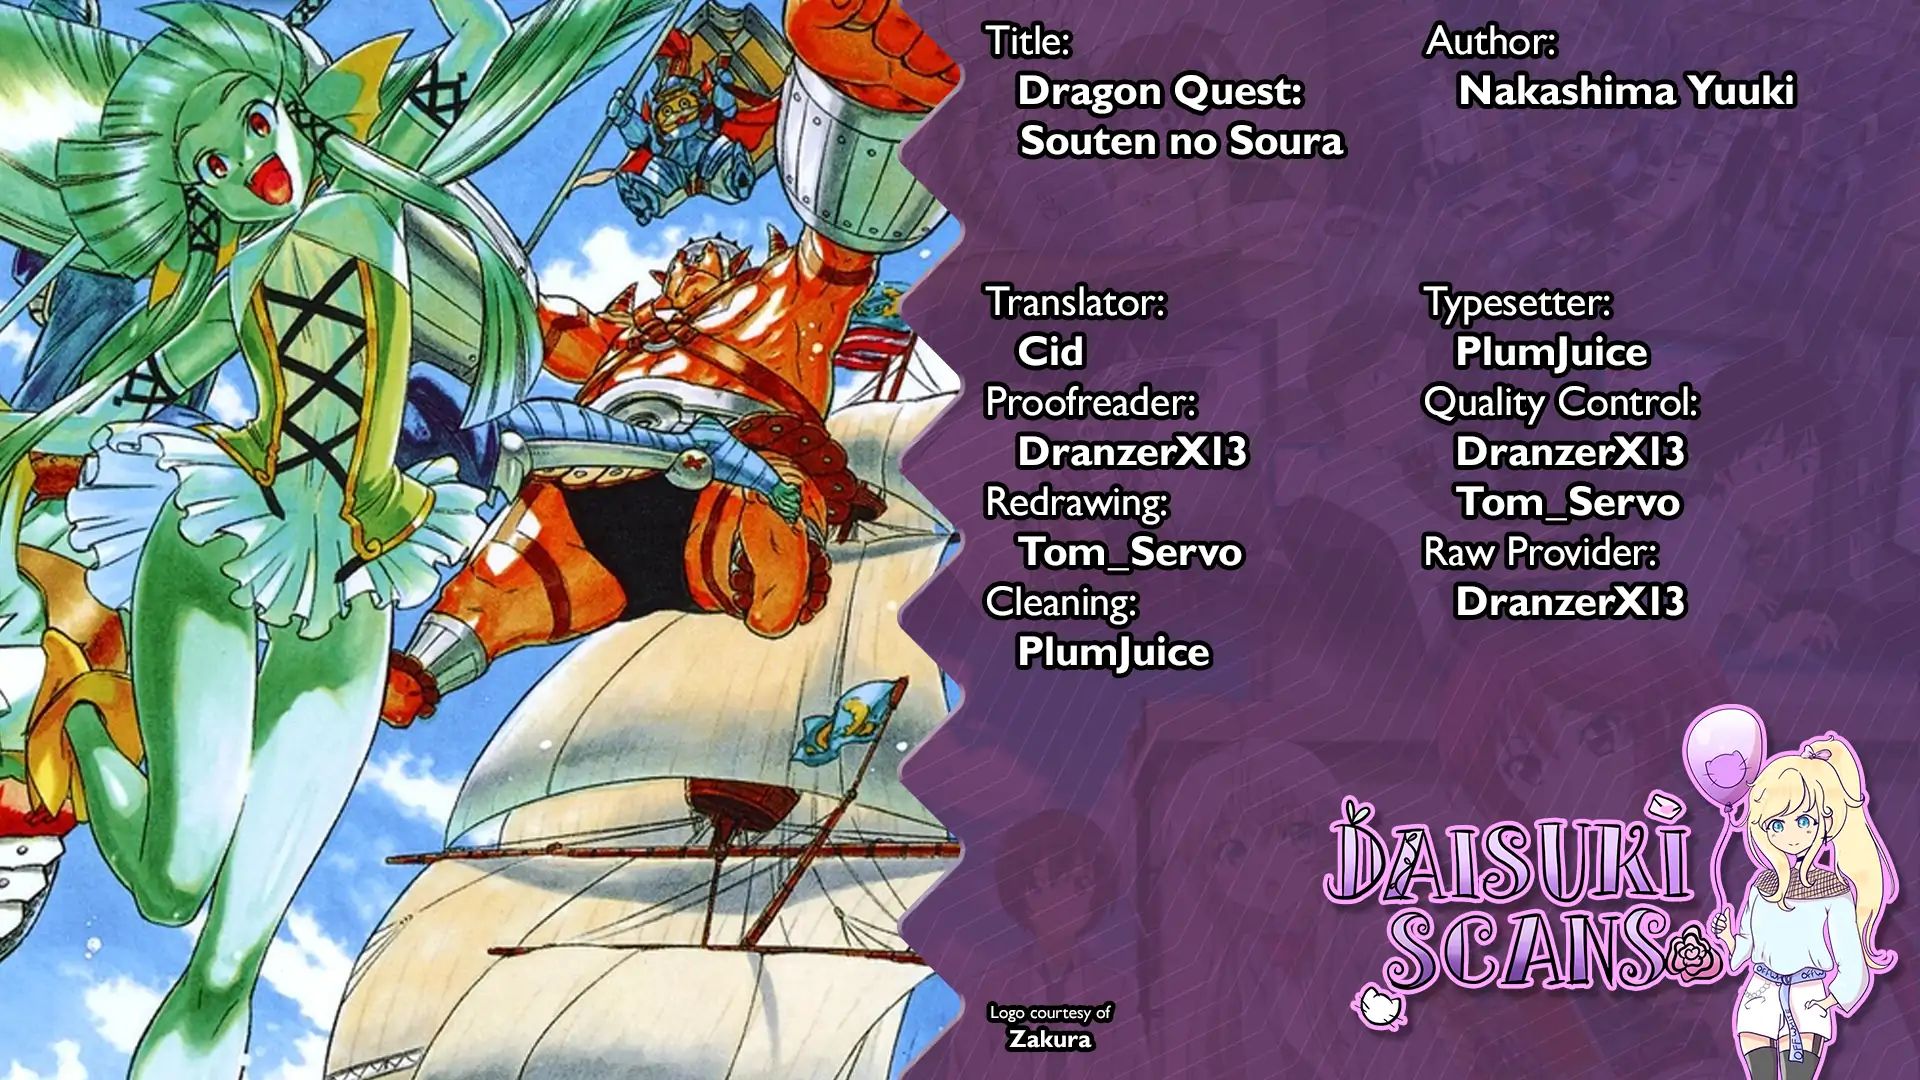 Dragon Quest: Sola in the Blue Sky Chapter 2: The Dragon Princess!!